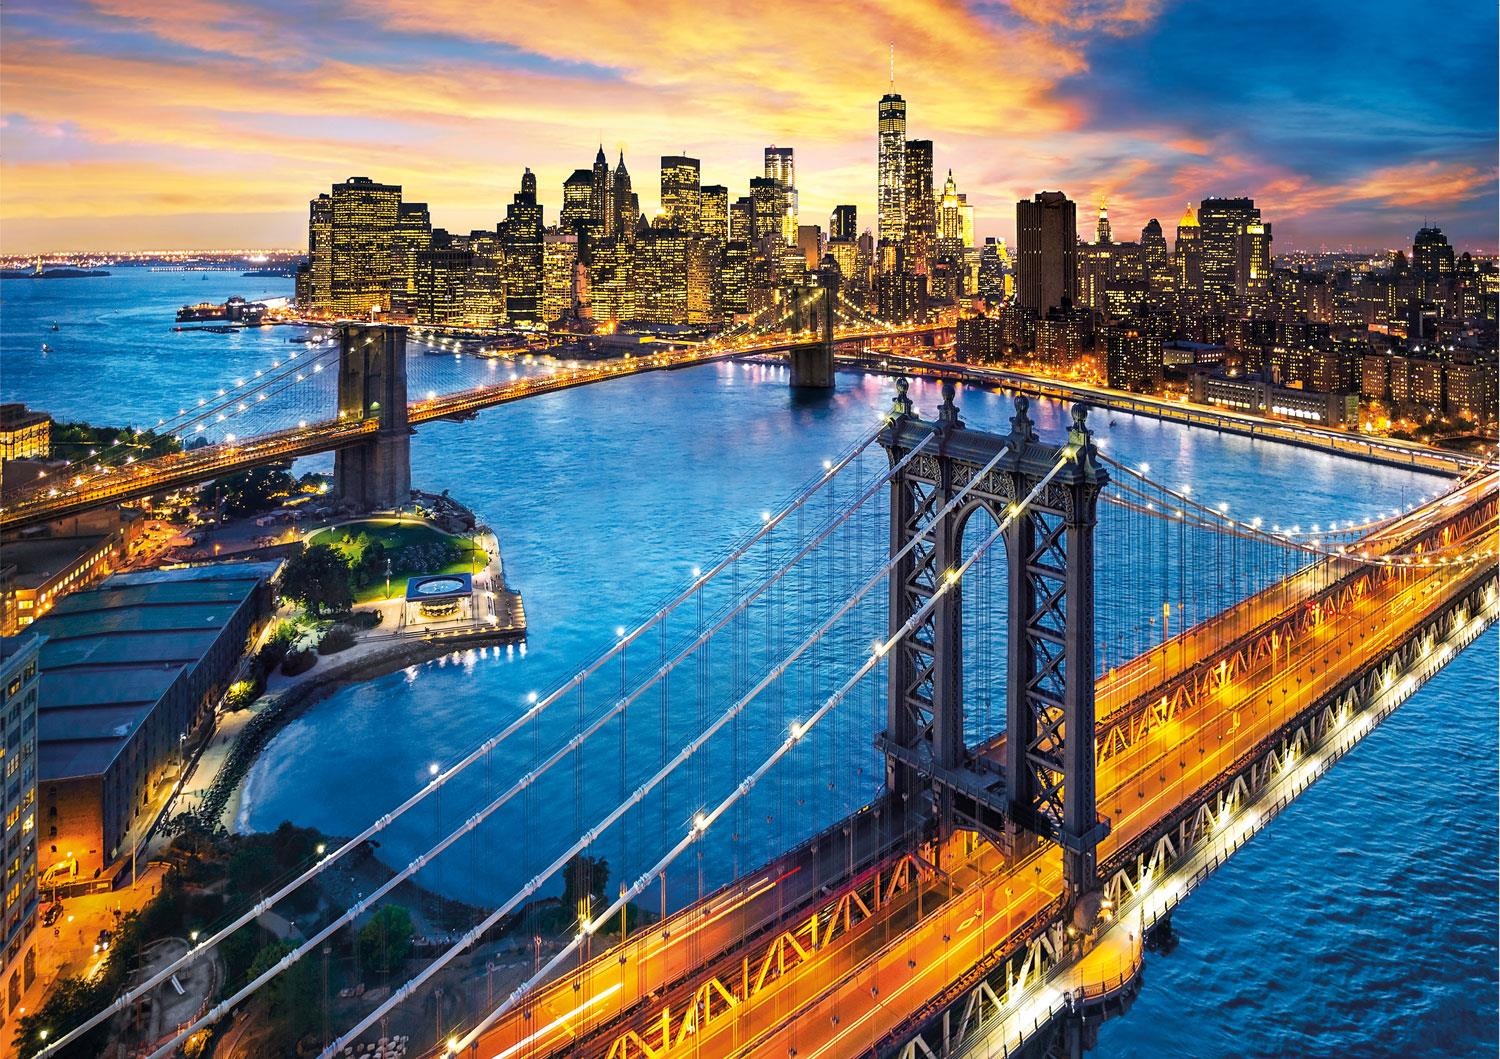 Clementoni New York High Quality Jigsaw Puzzle (3000 Pieces)